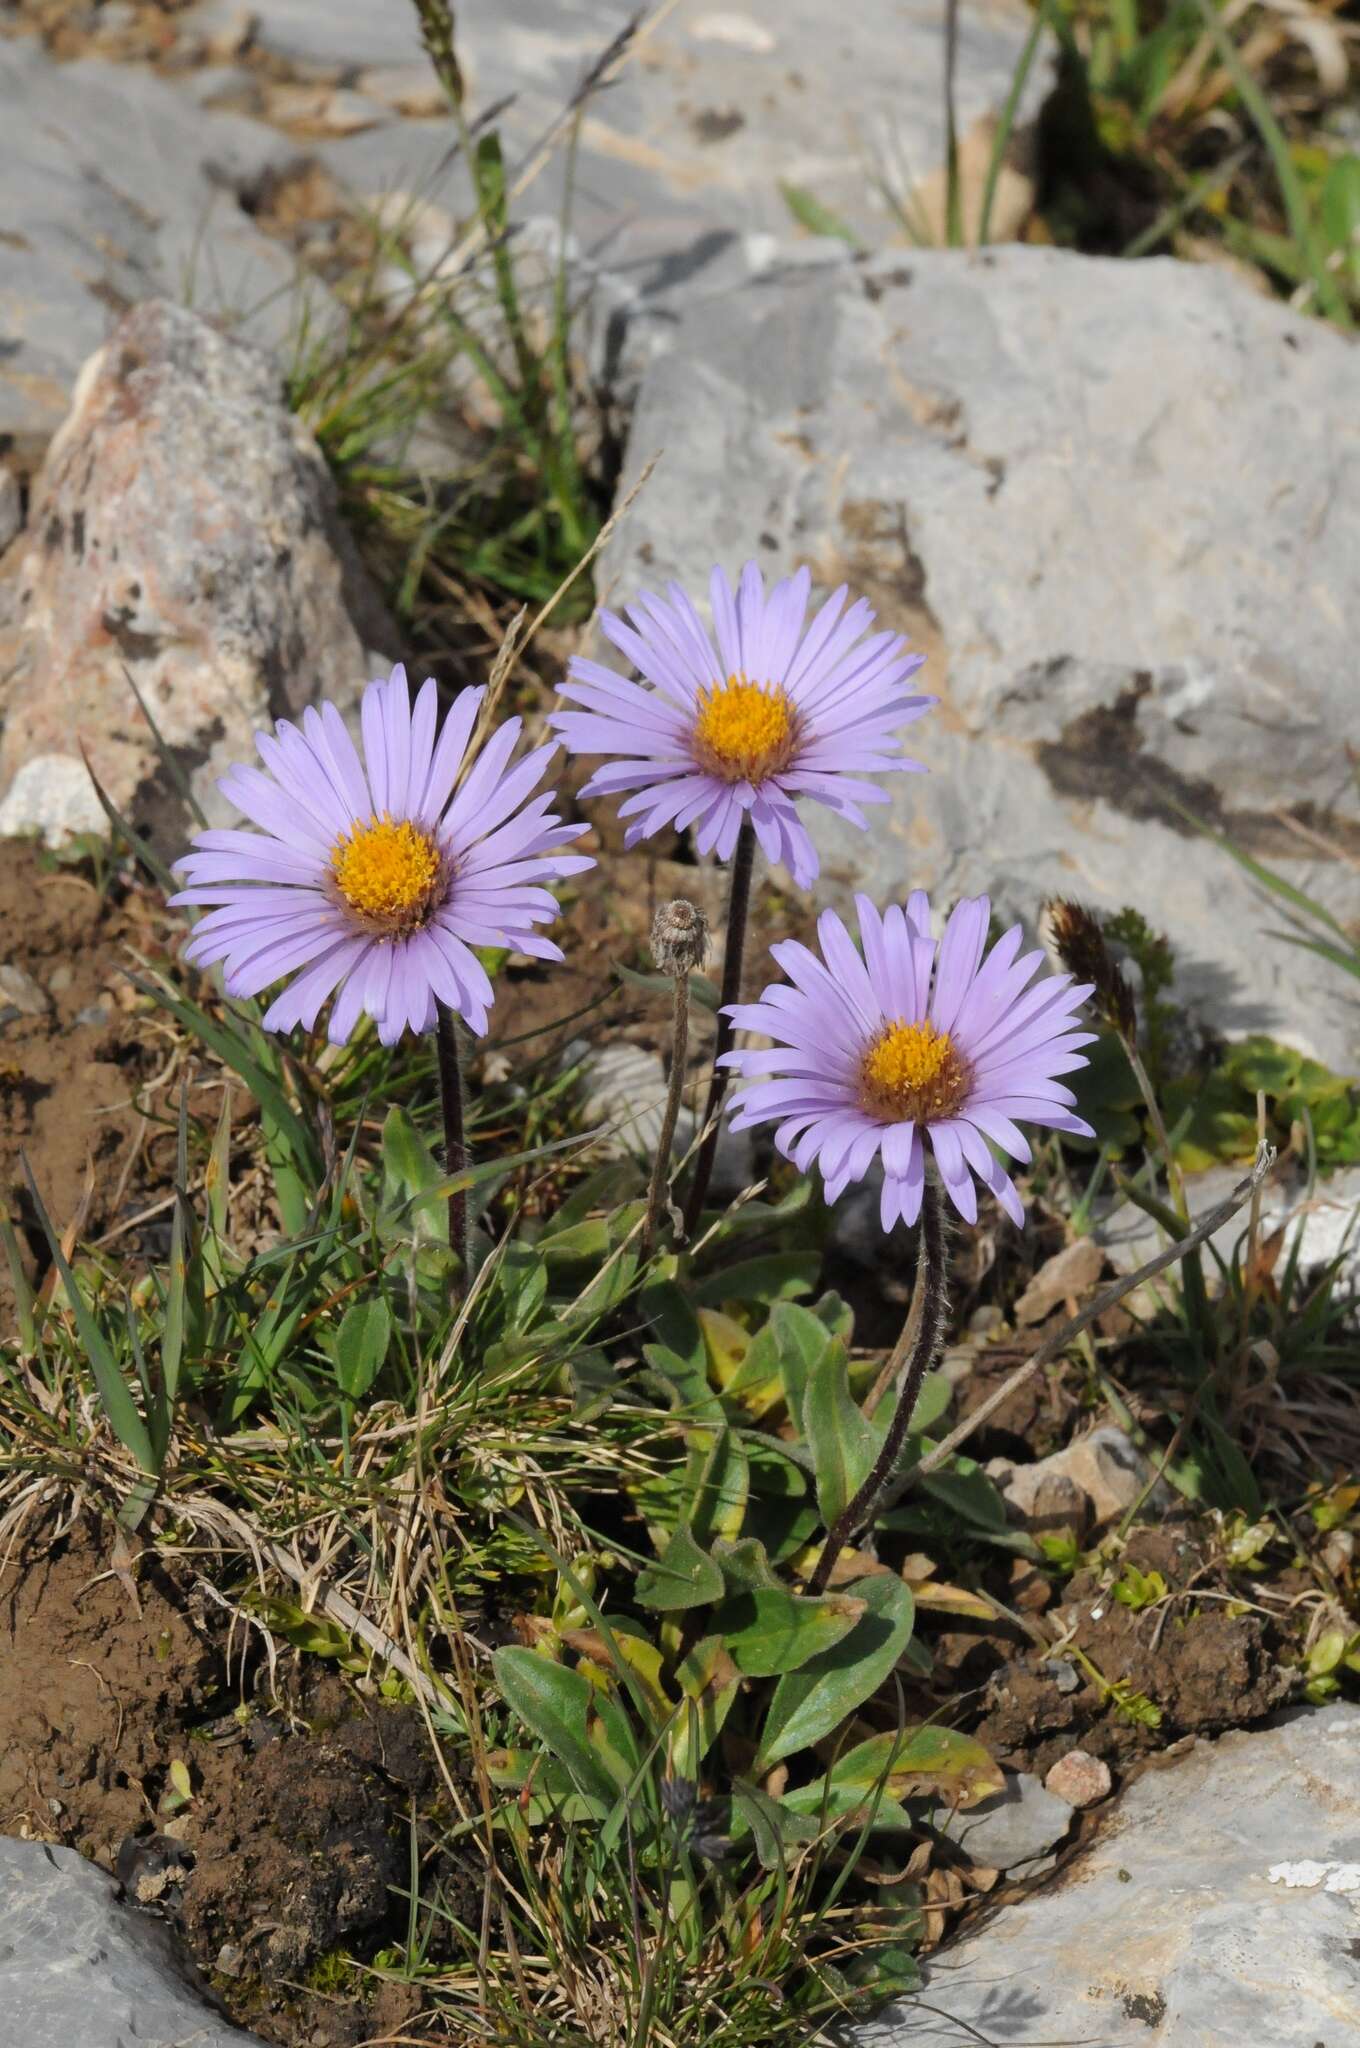 Image of Aster asteroides (DC.) Kuntze